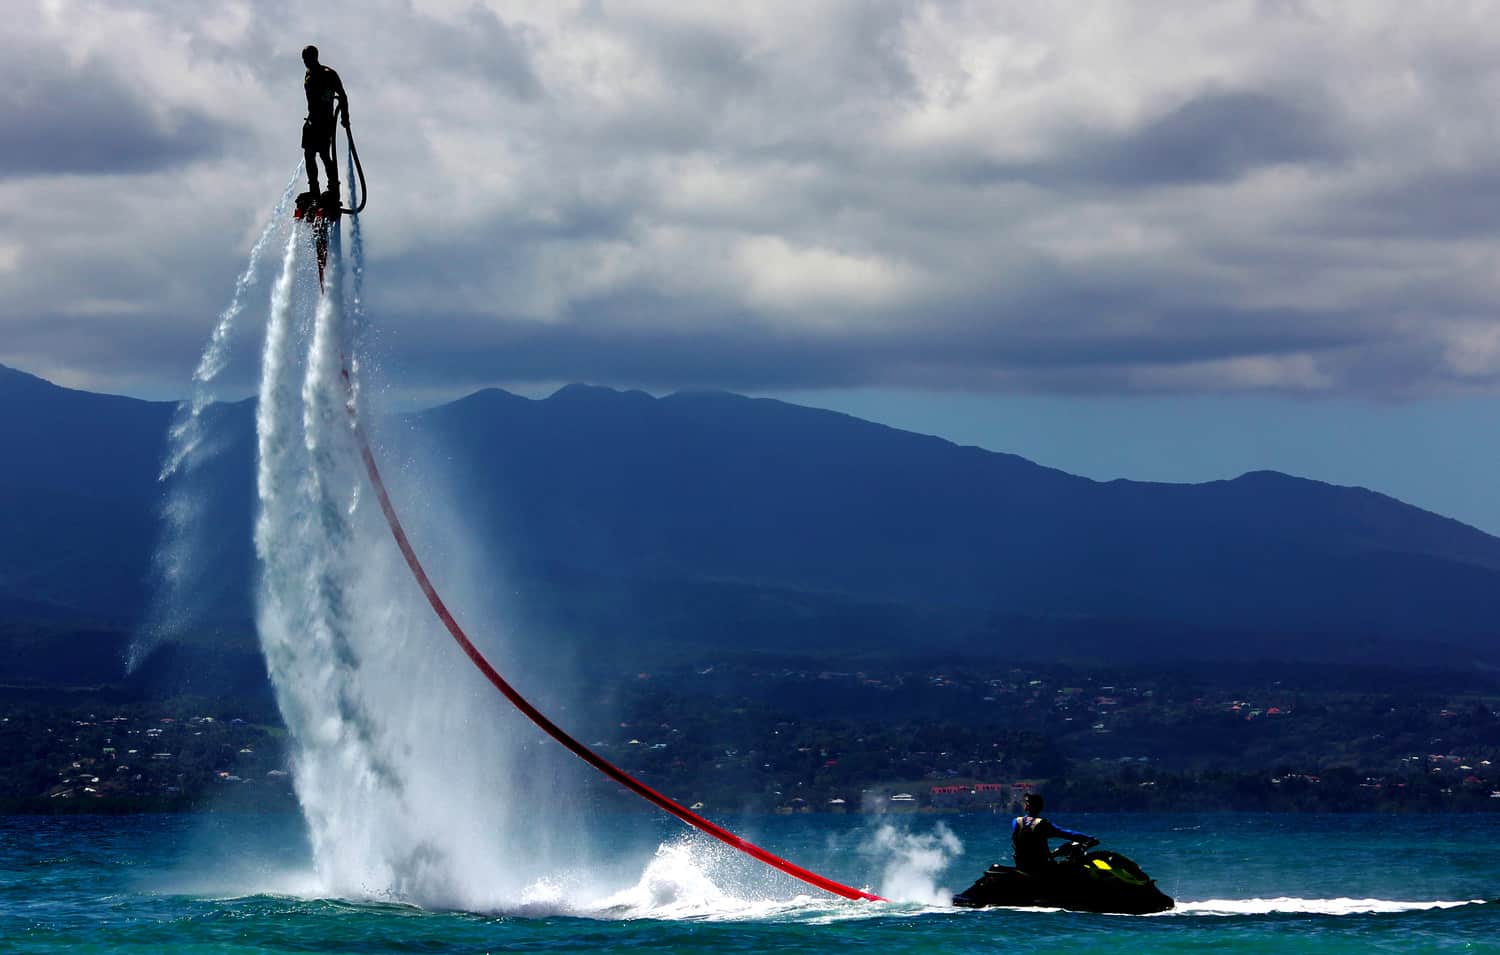 https://res.cloudinary.com/manawa/image/upload/v1639134867/articles/3161/Flyboard-Guadeloupe-HAUT.jpg